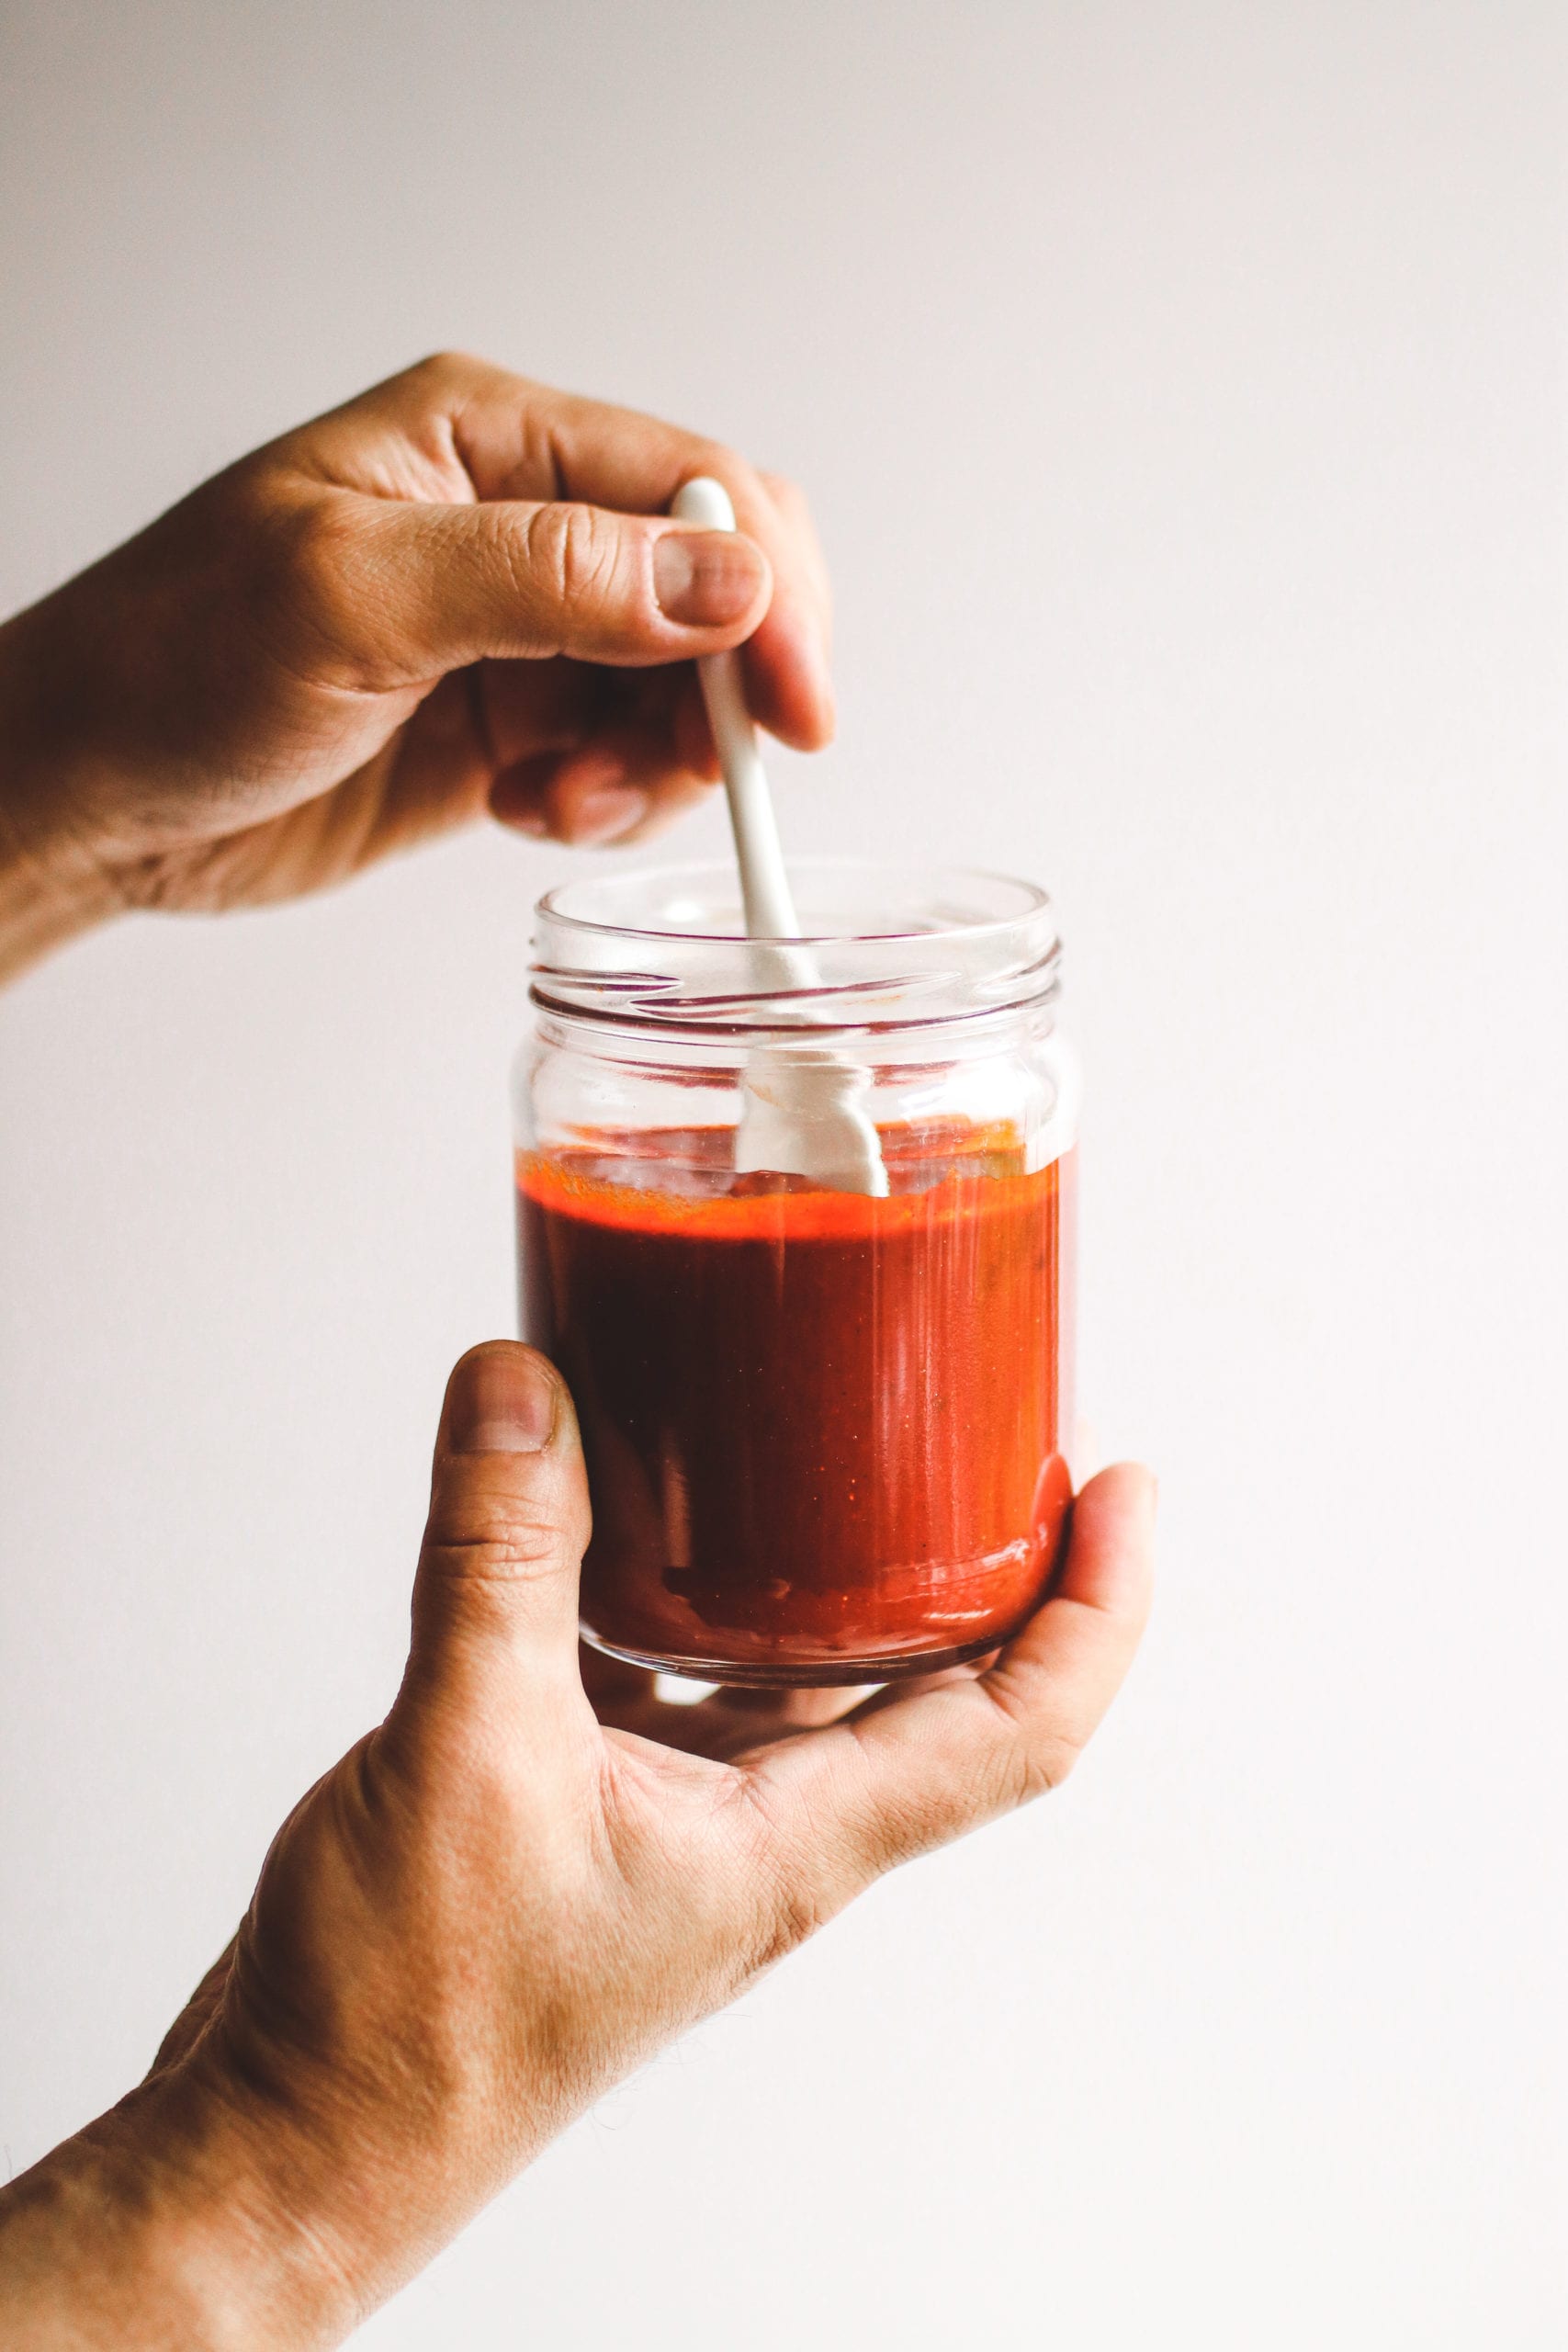 a hand mixing Korean chili paste in a glass jar